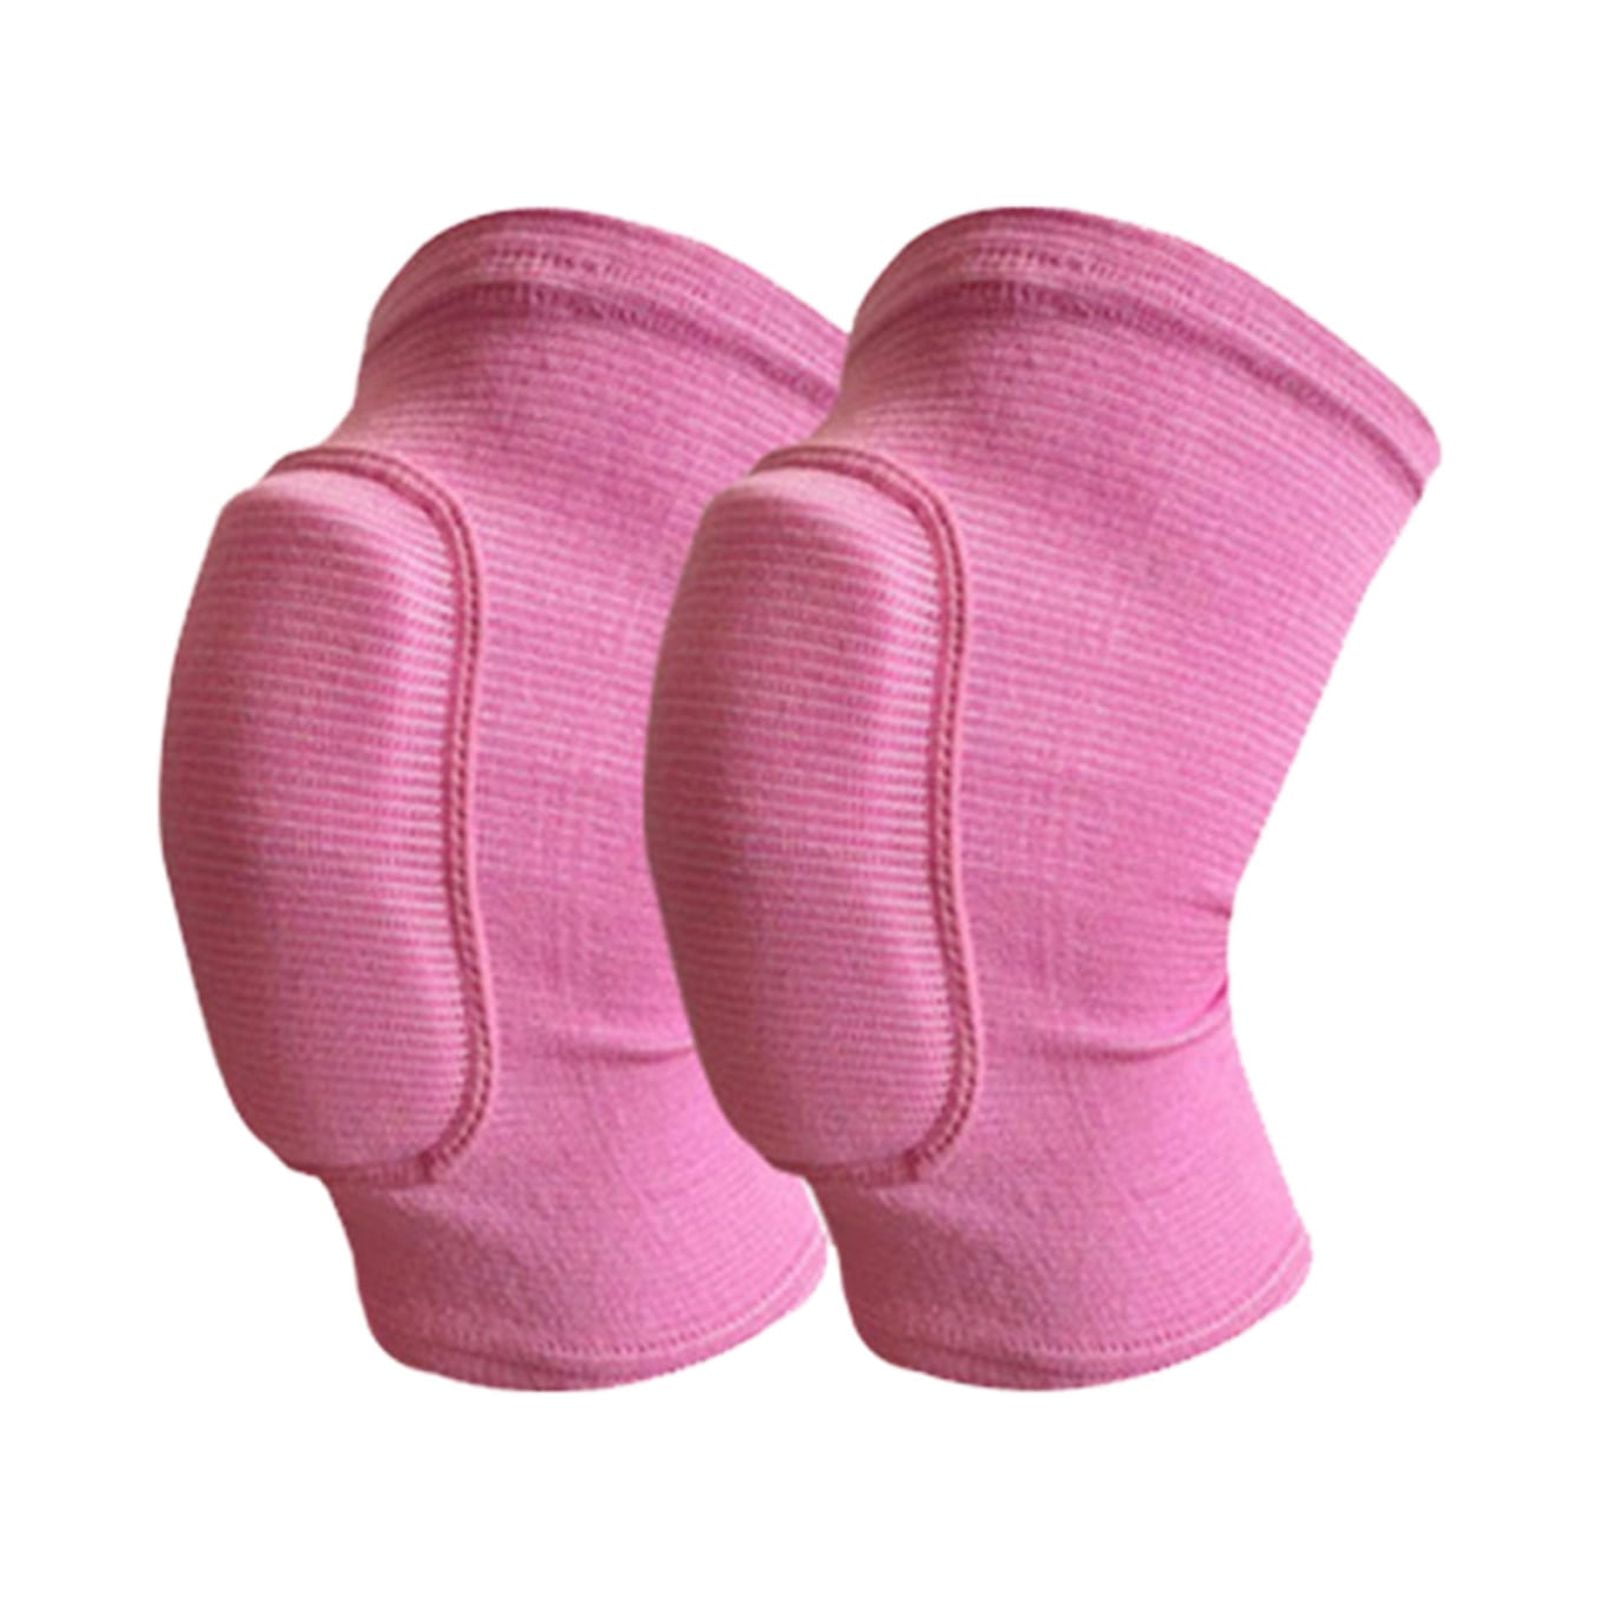 Non-slip Knee Brace Soft Breathable Knee Pads Compression Sleeve For ...